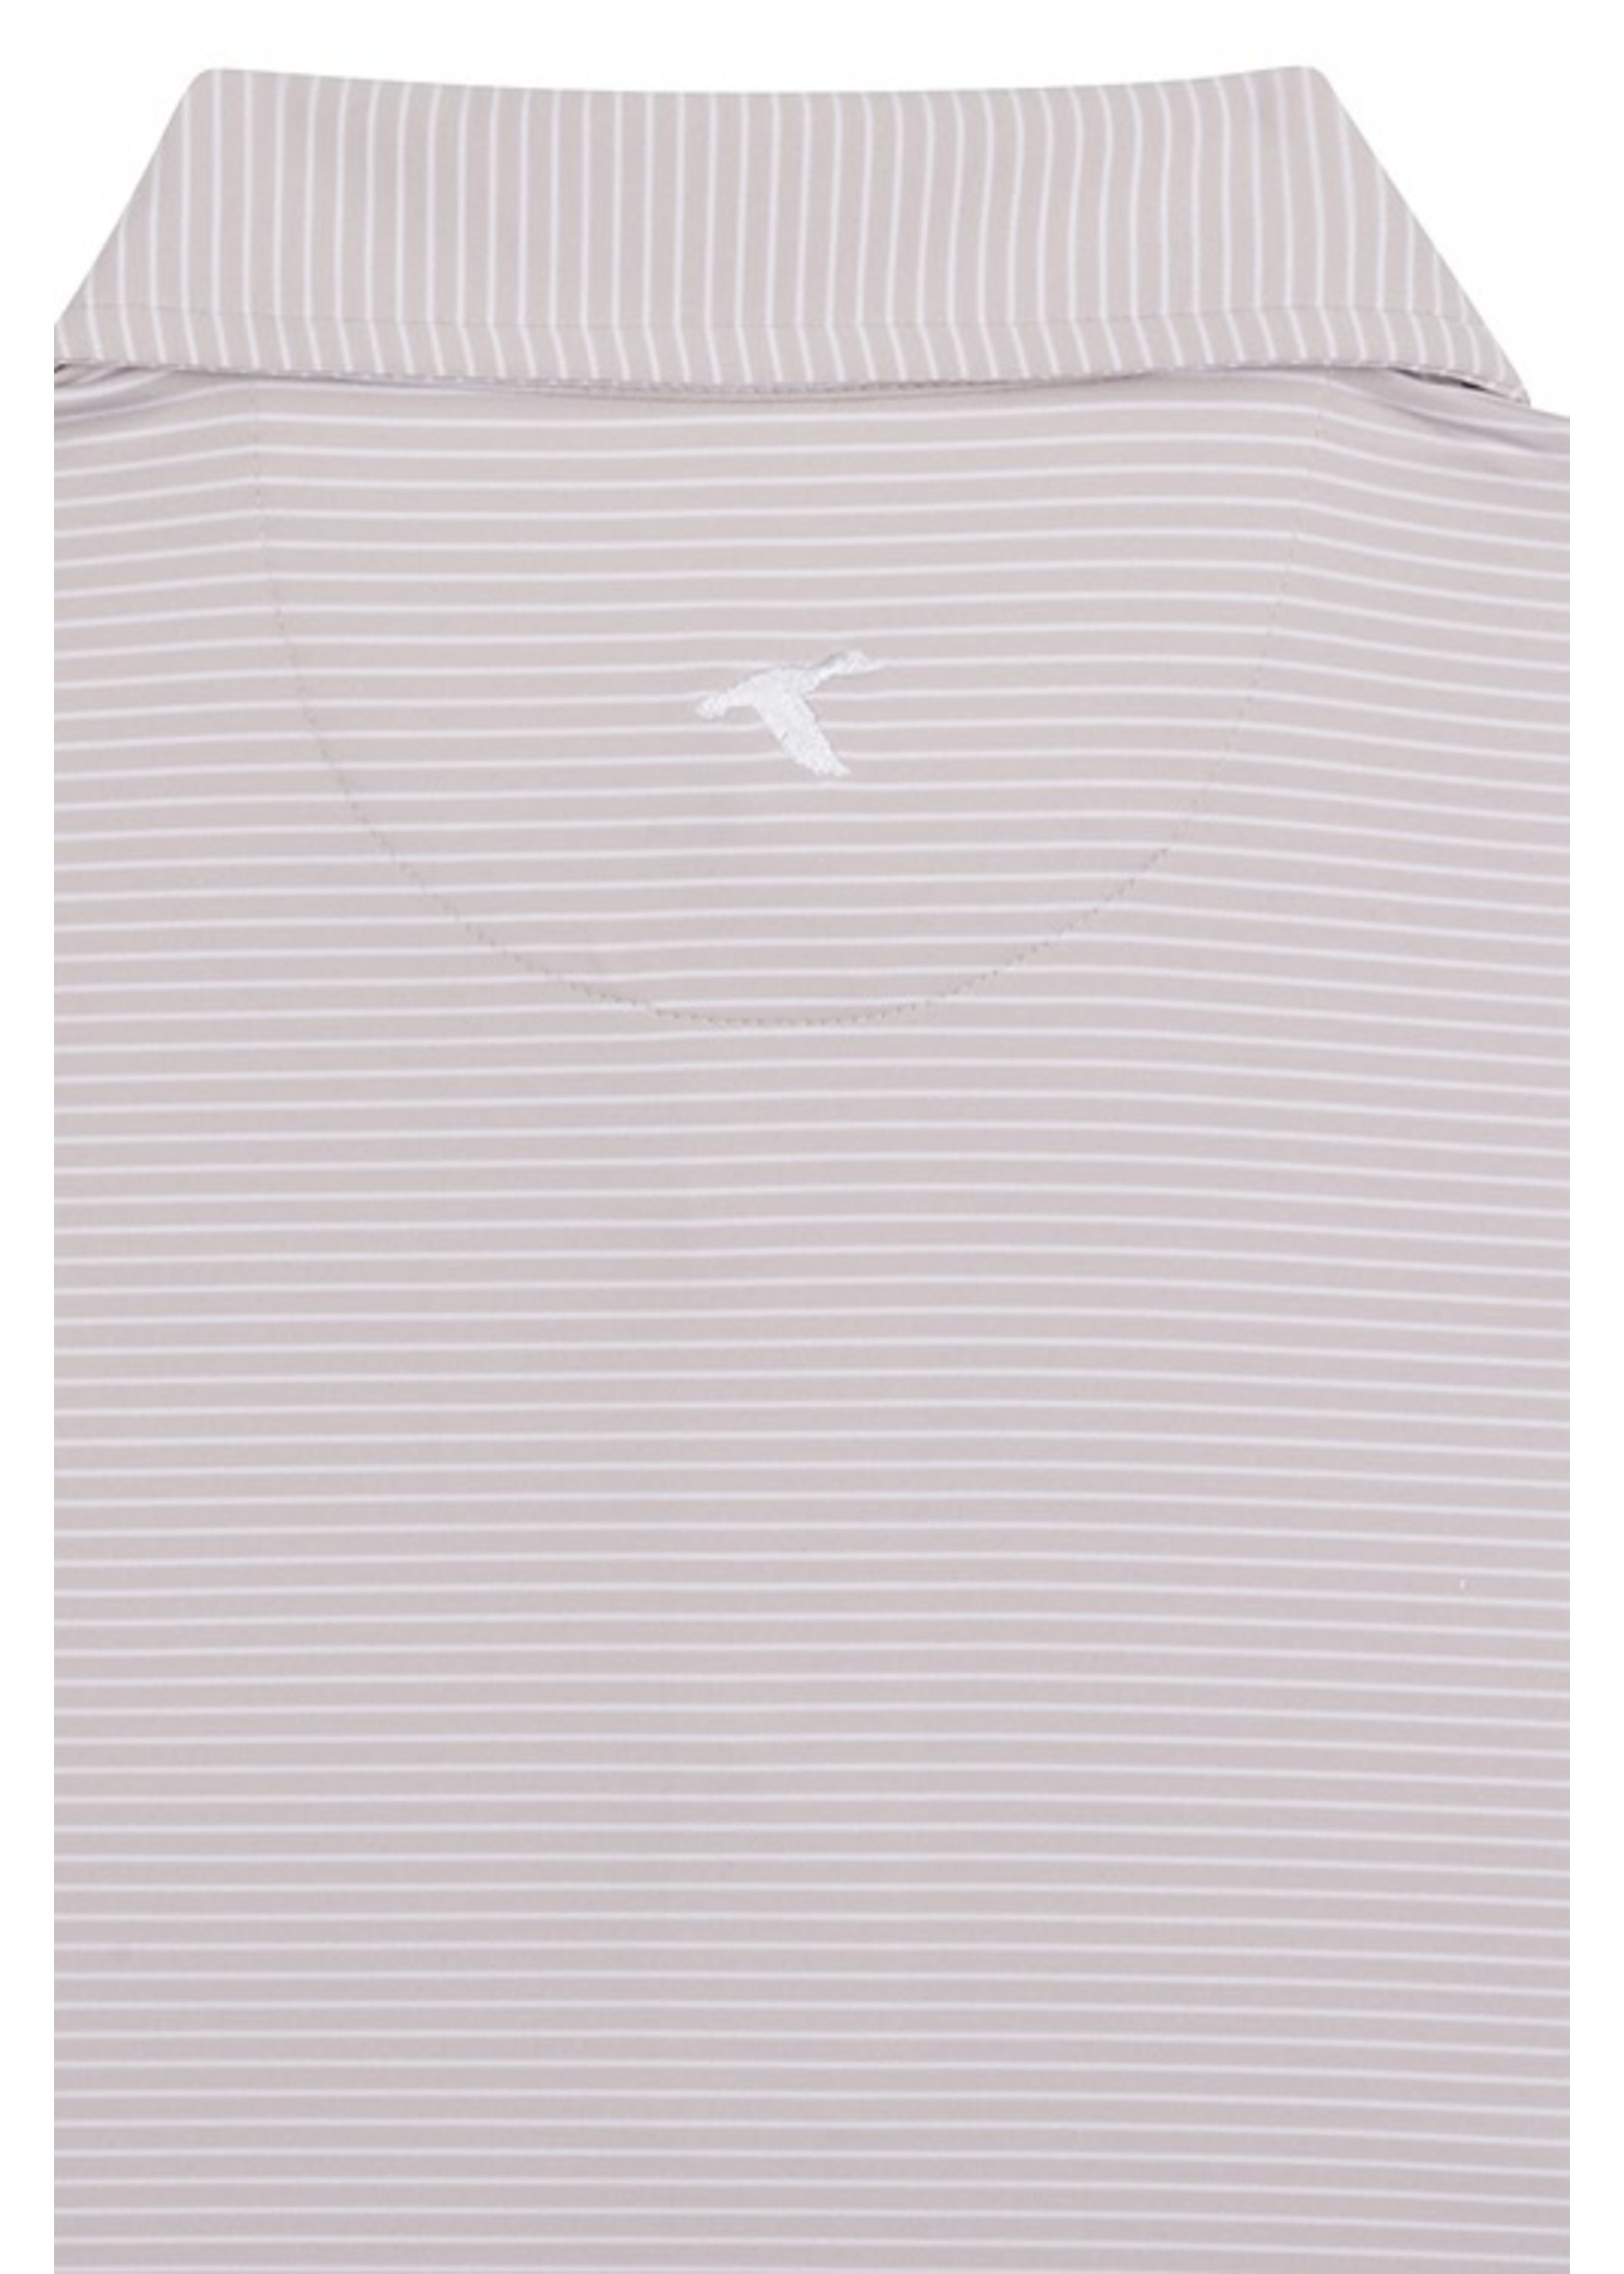 Genteal Driver Stripe Performance Polo